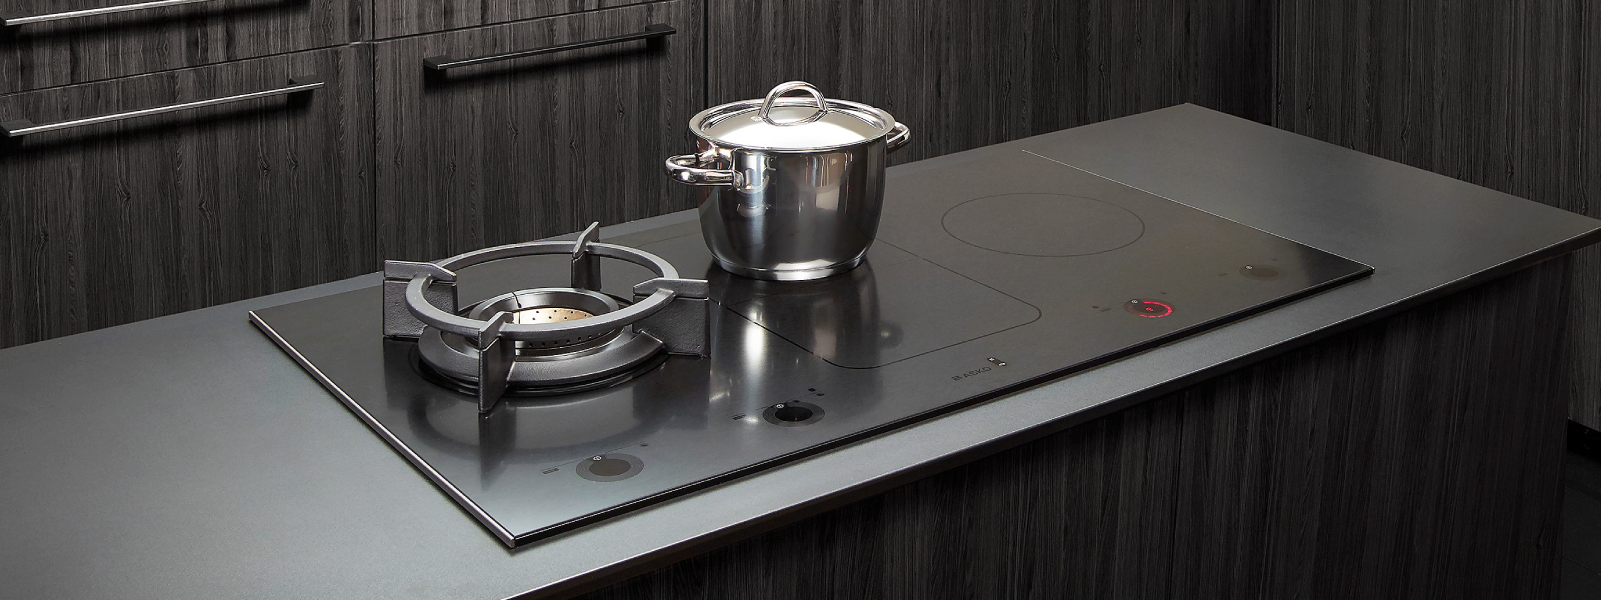 Save up to $1200 on selected Asko Duo Fusion Cooktops at Hart & Co